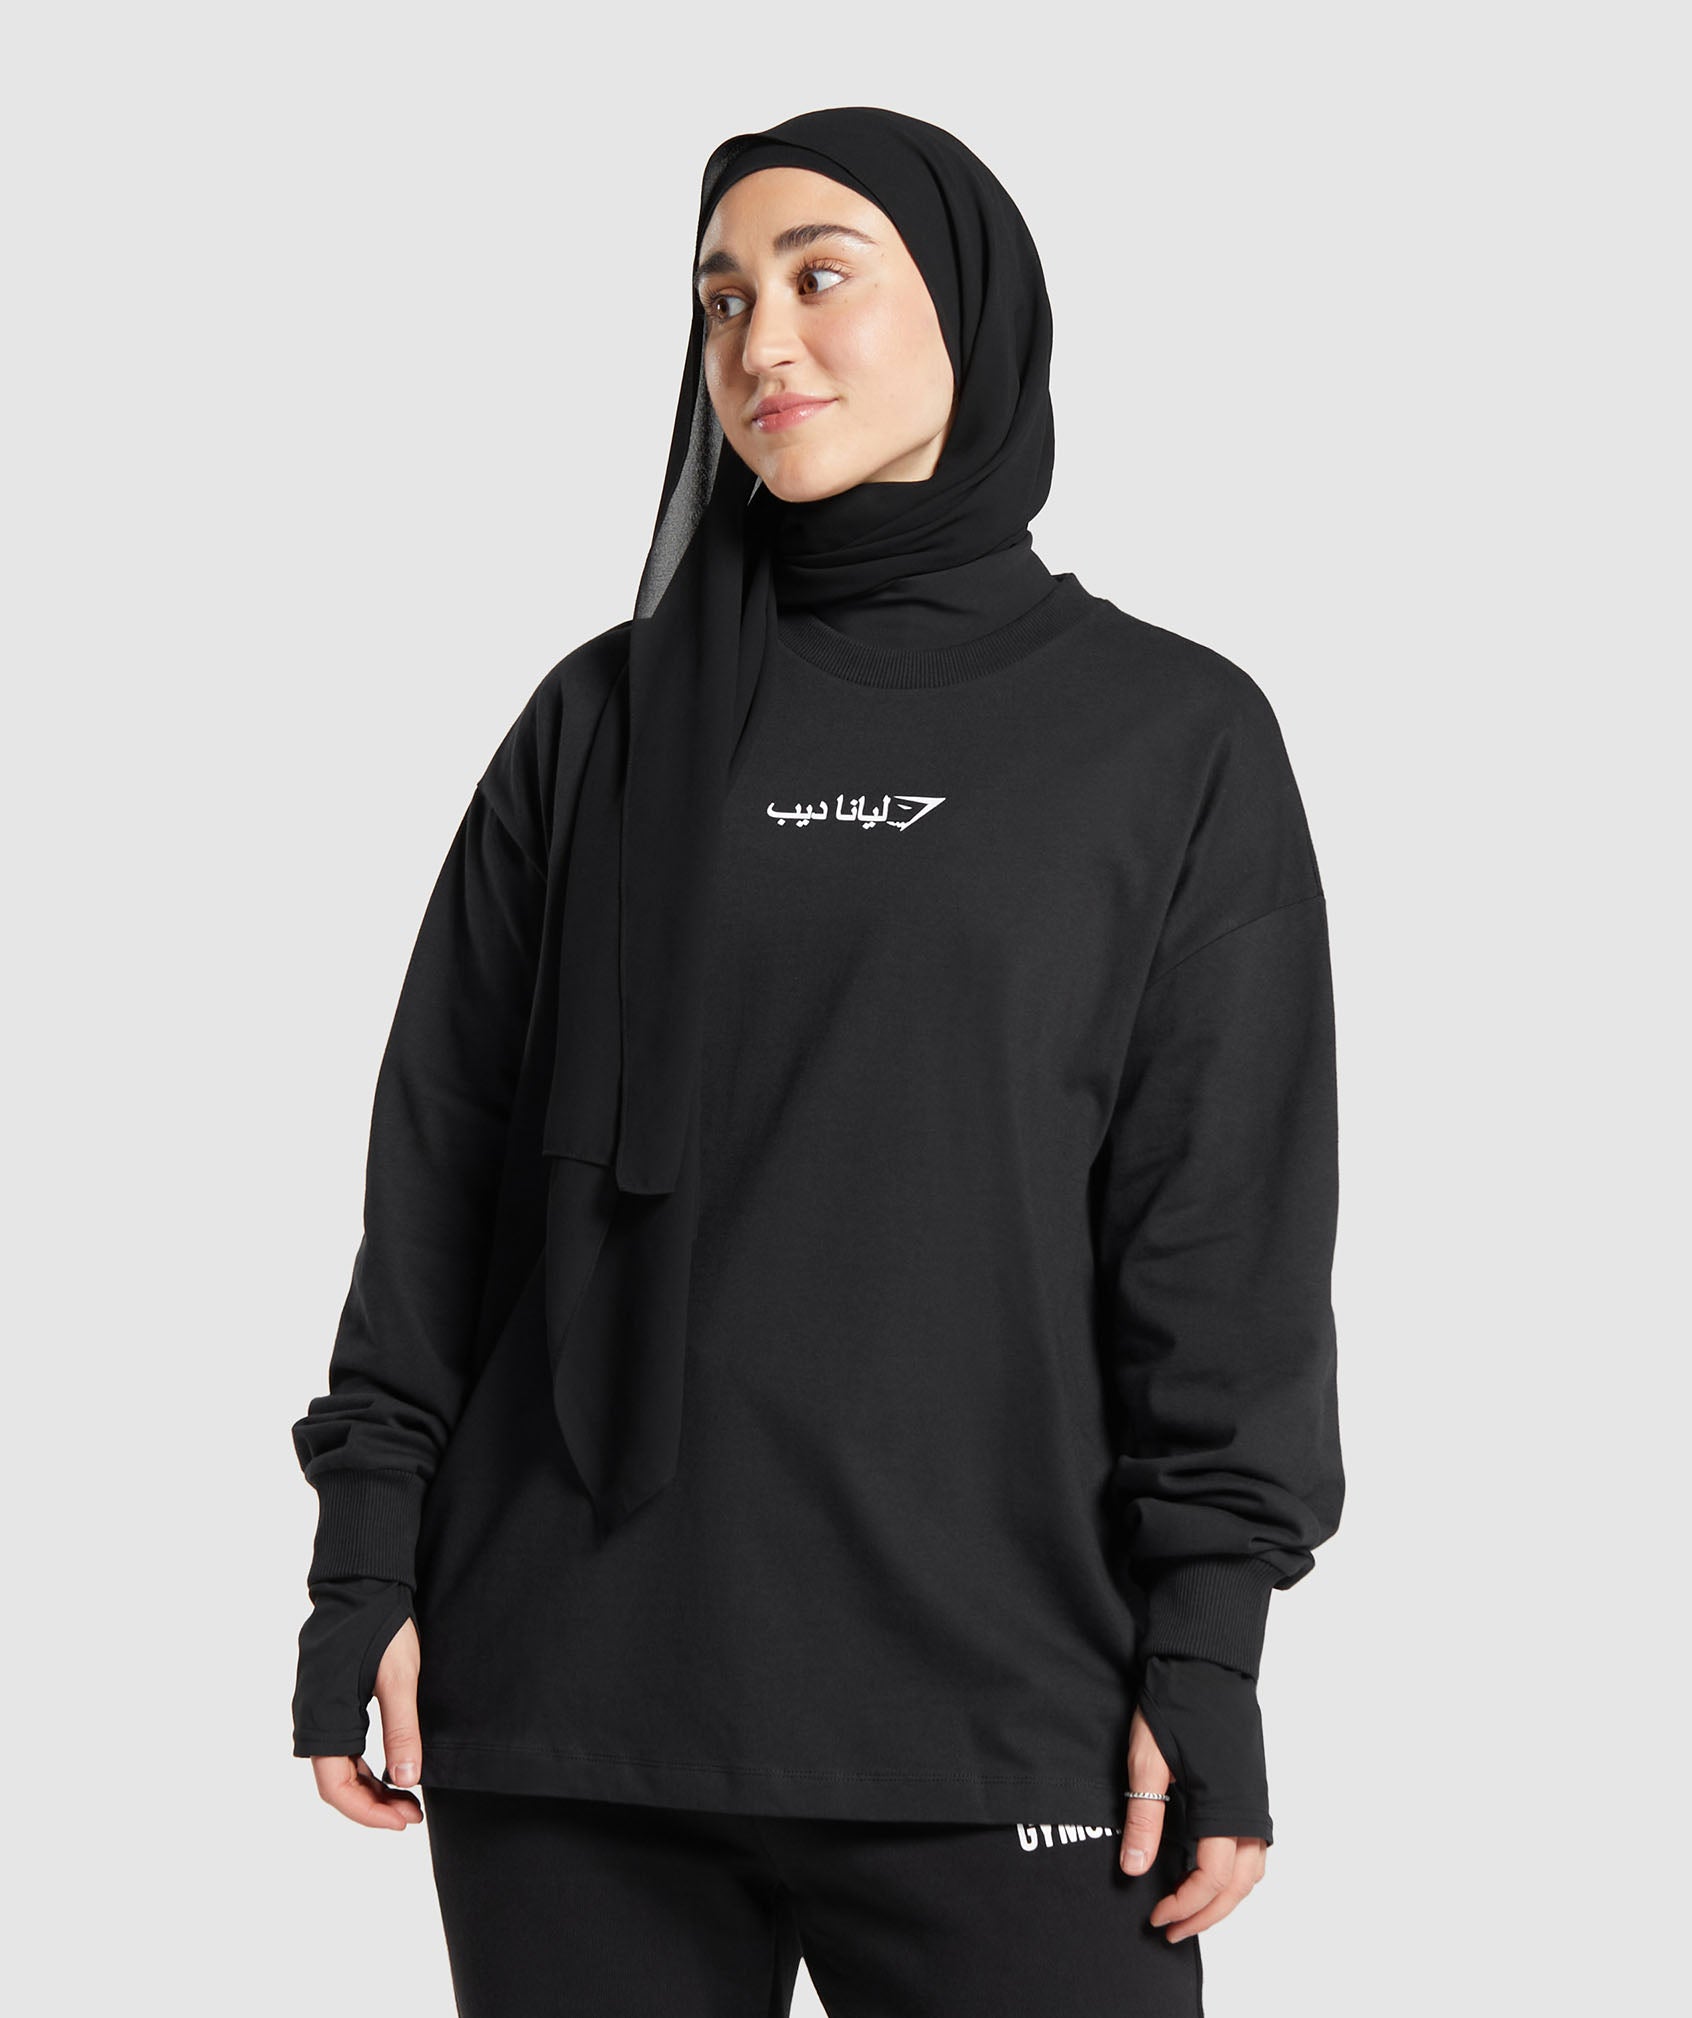 GS X Leana Deeb Oversized Oversized Long Sleeve Top in {{variantColor} is out of stock